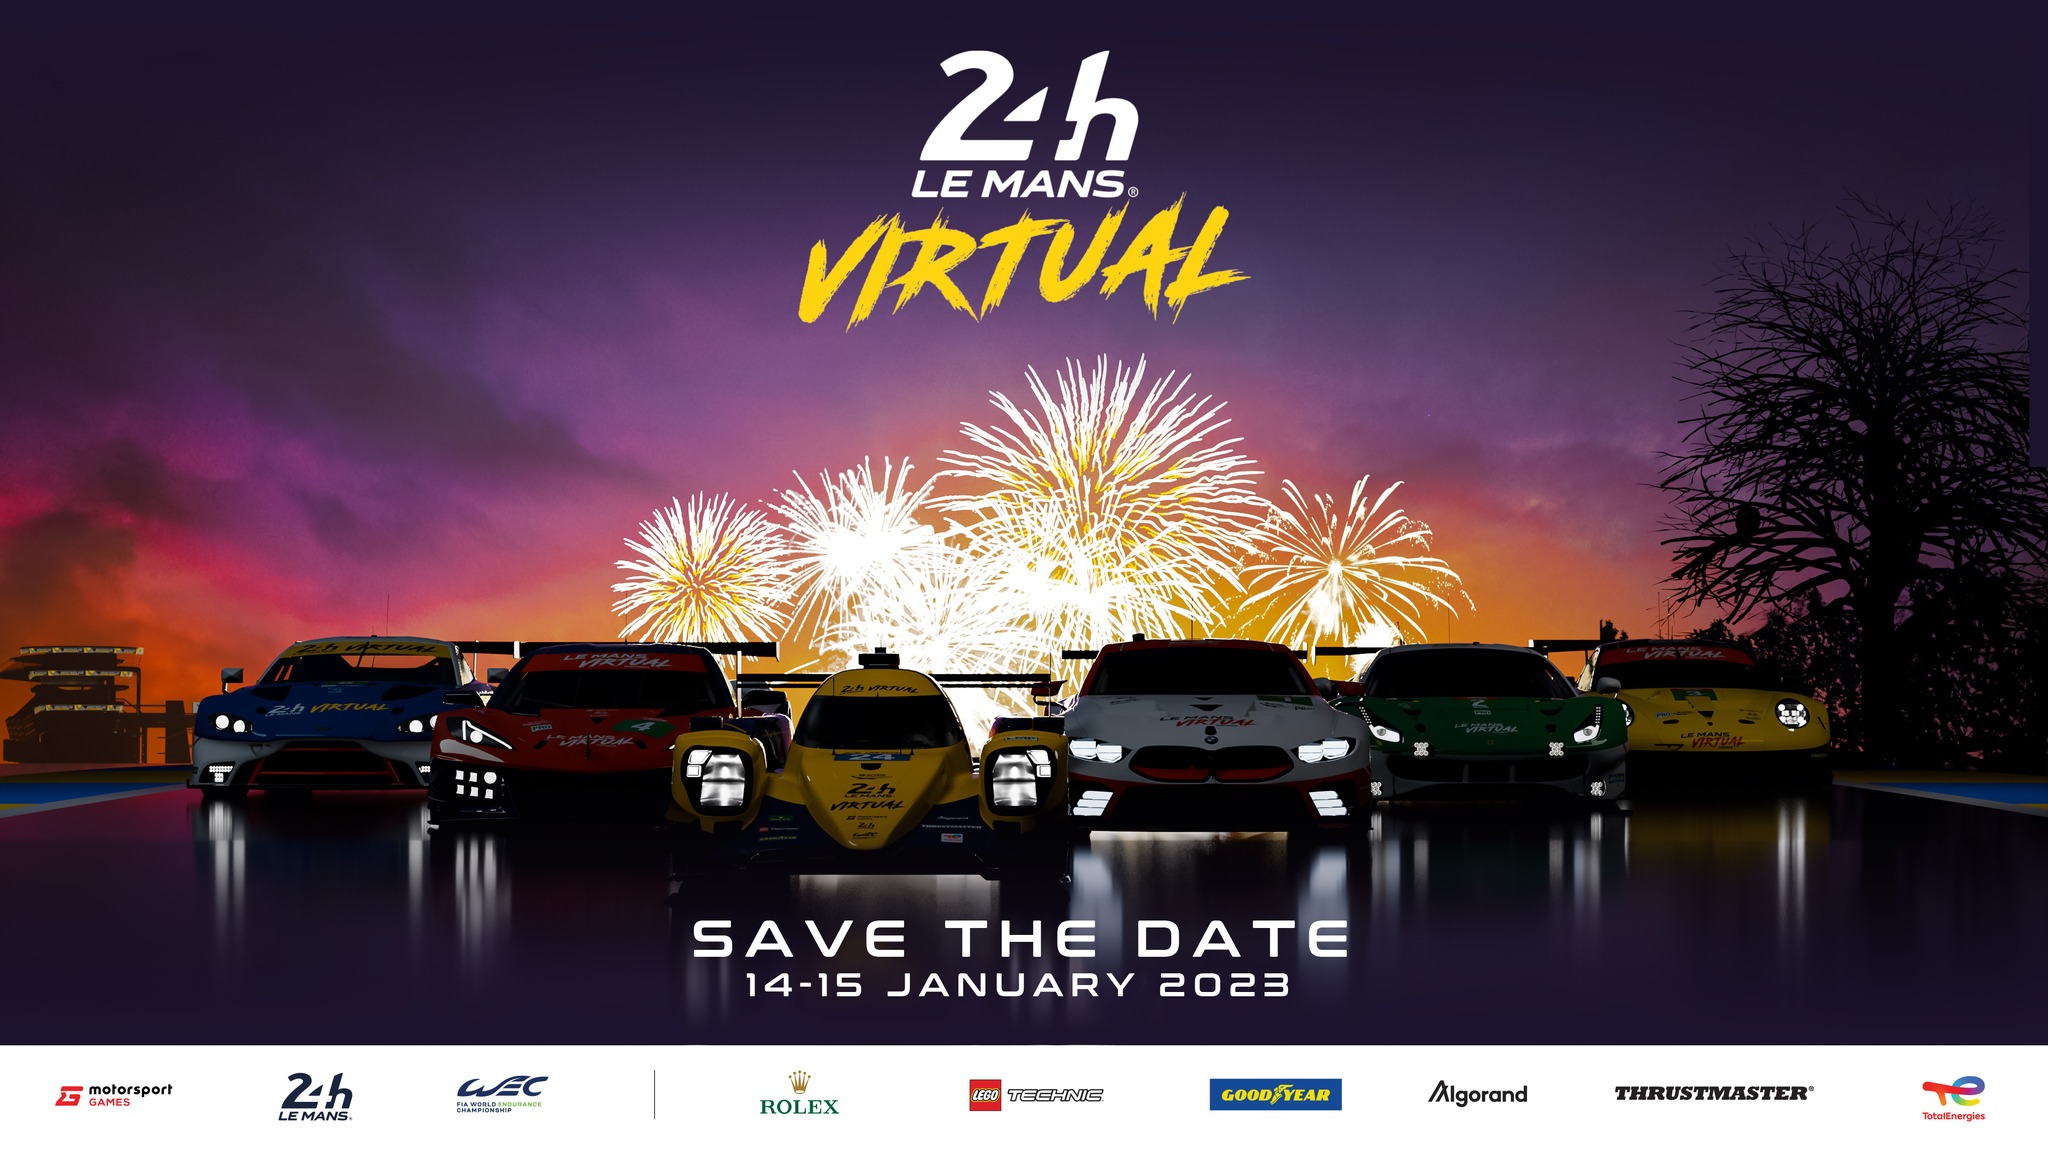 More information about "rFactor 2 - LIVE: 24 Hours of Le Mans Virtual"